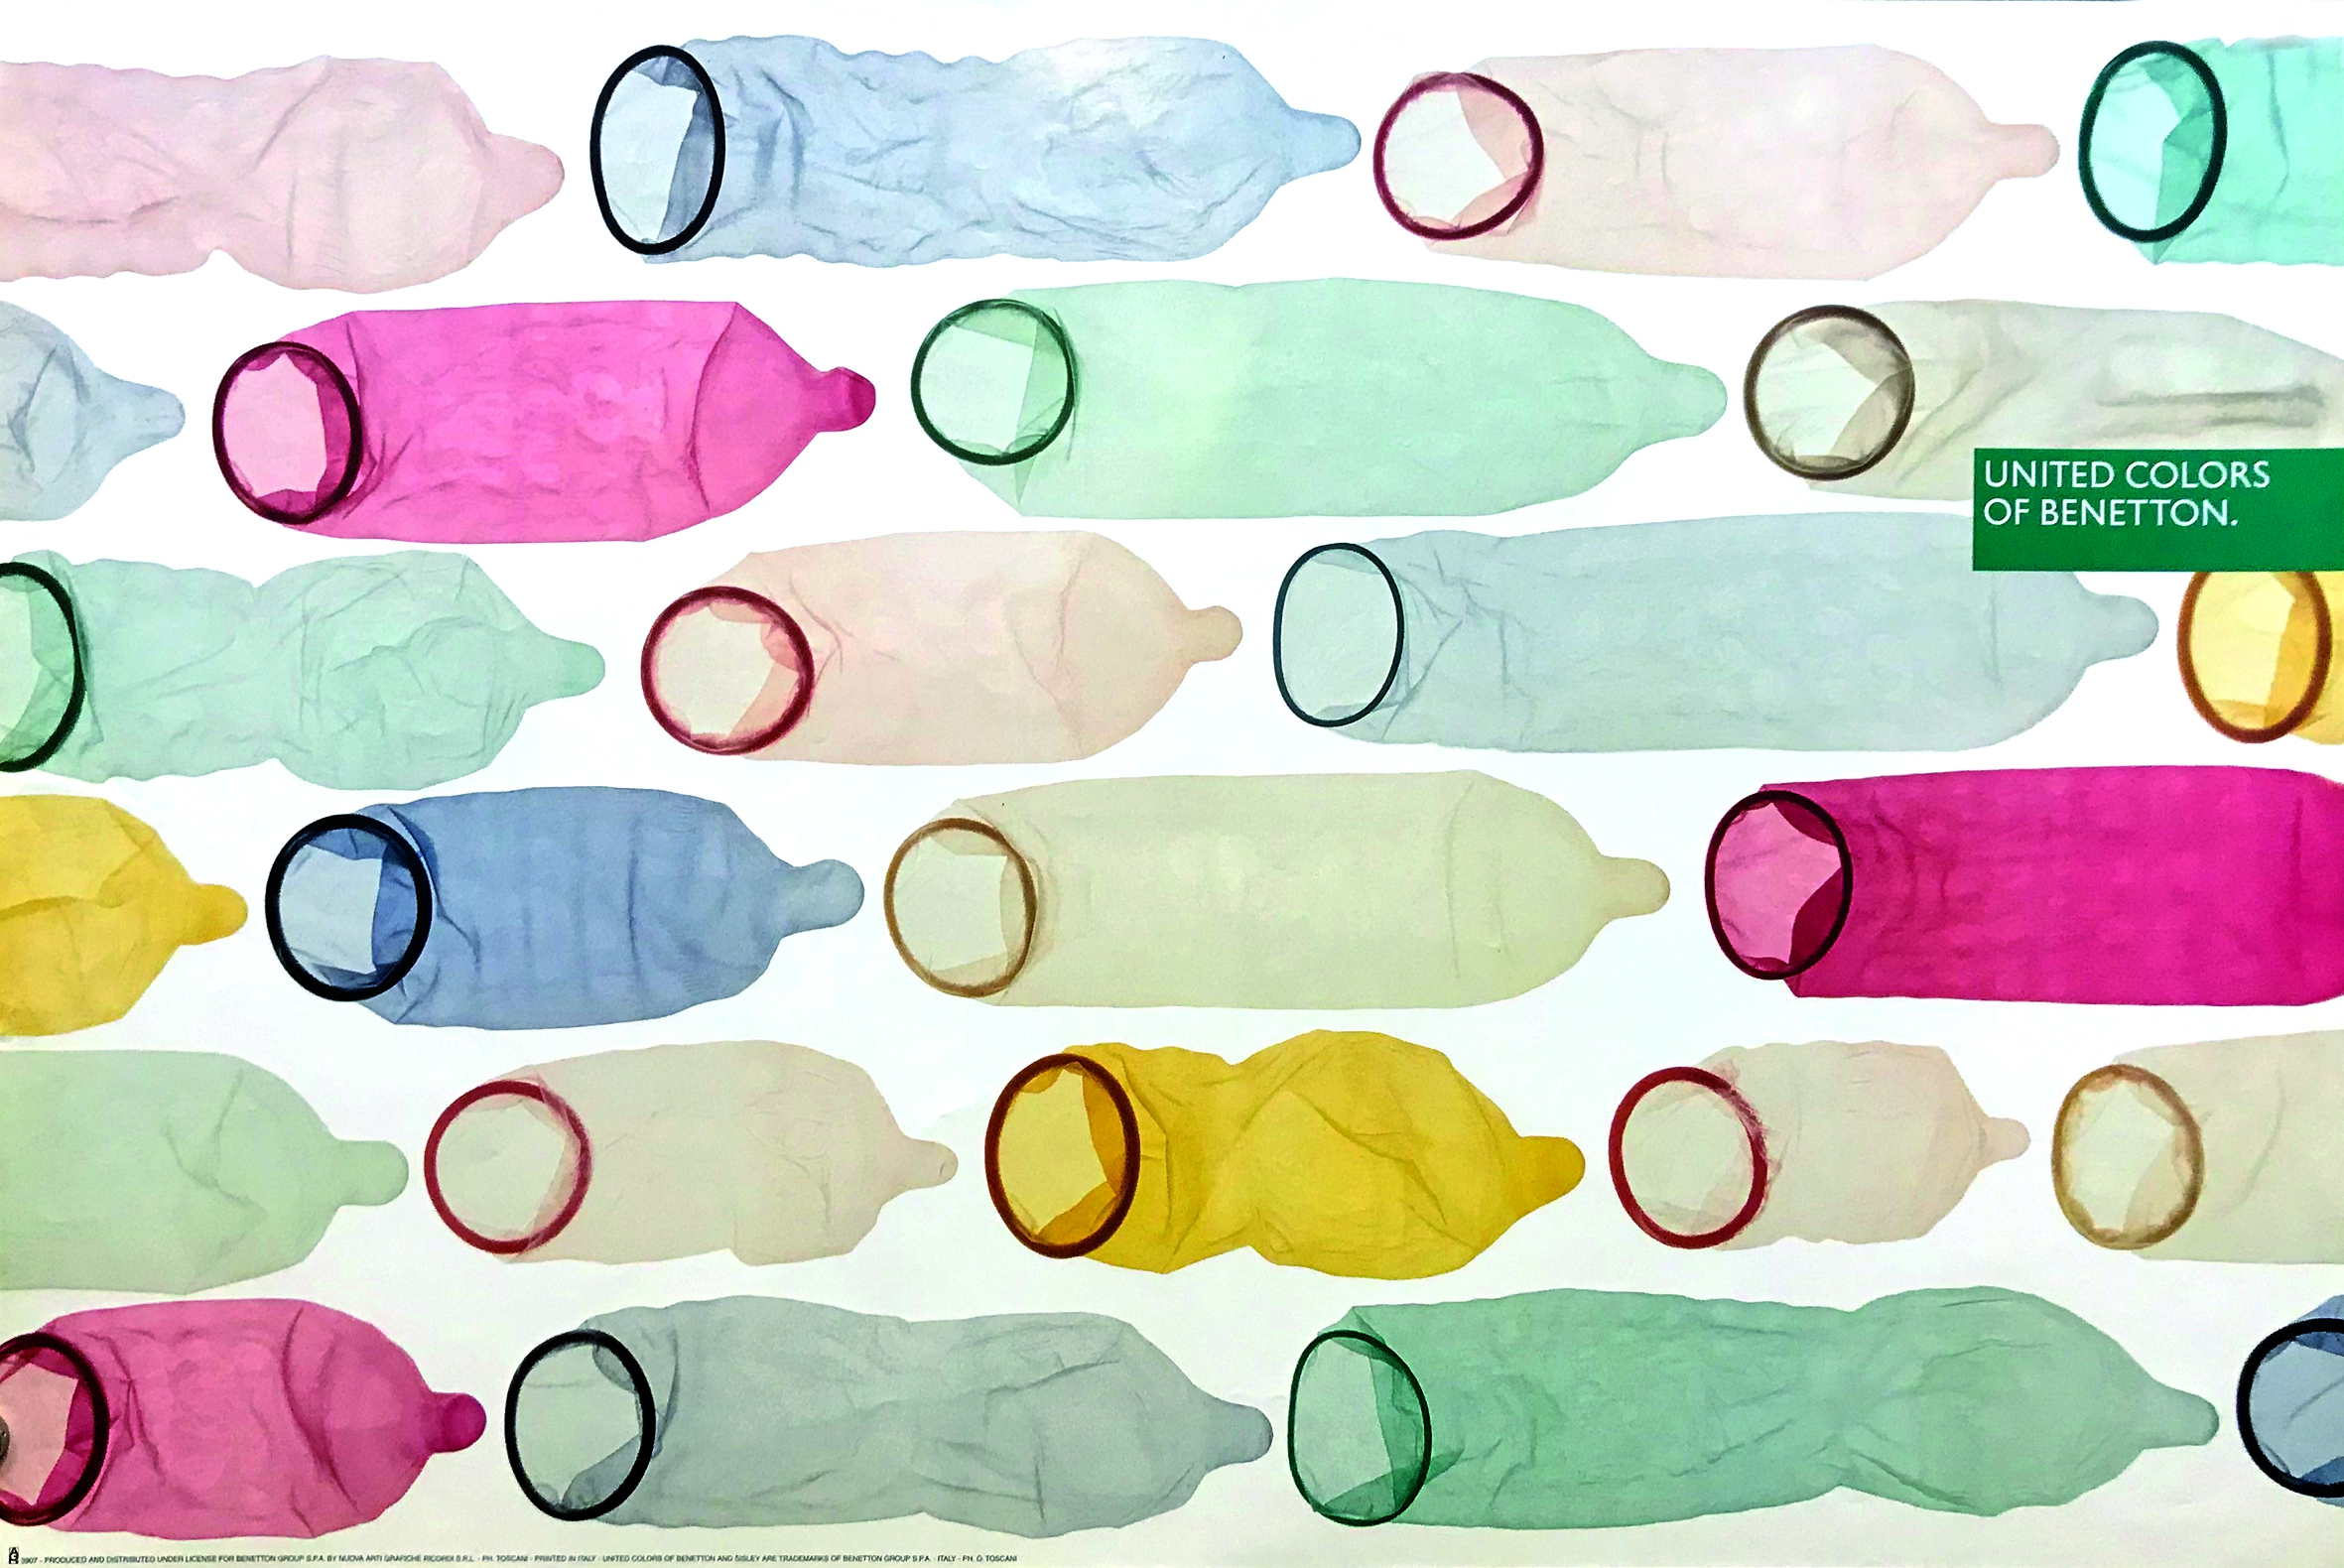 Artwork by Oliviero Toscani, UNITED COLORS OF BENETTON, Made of offset poster